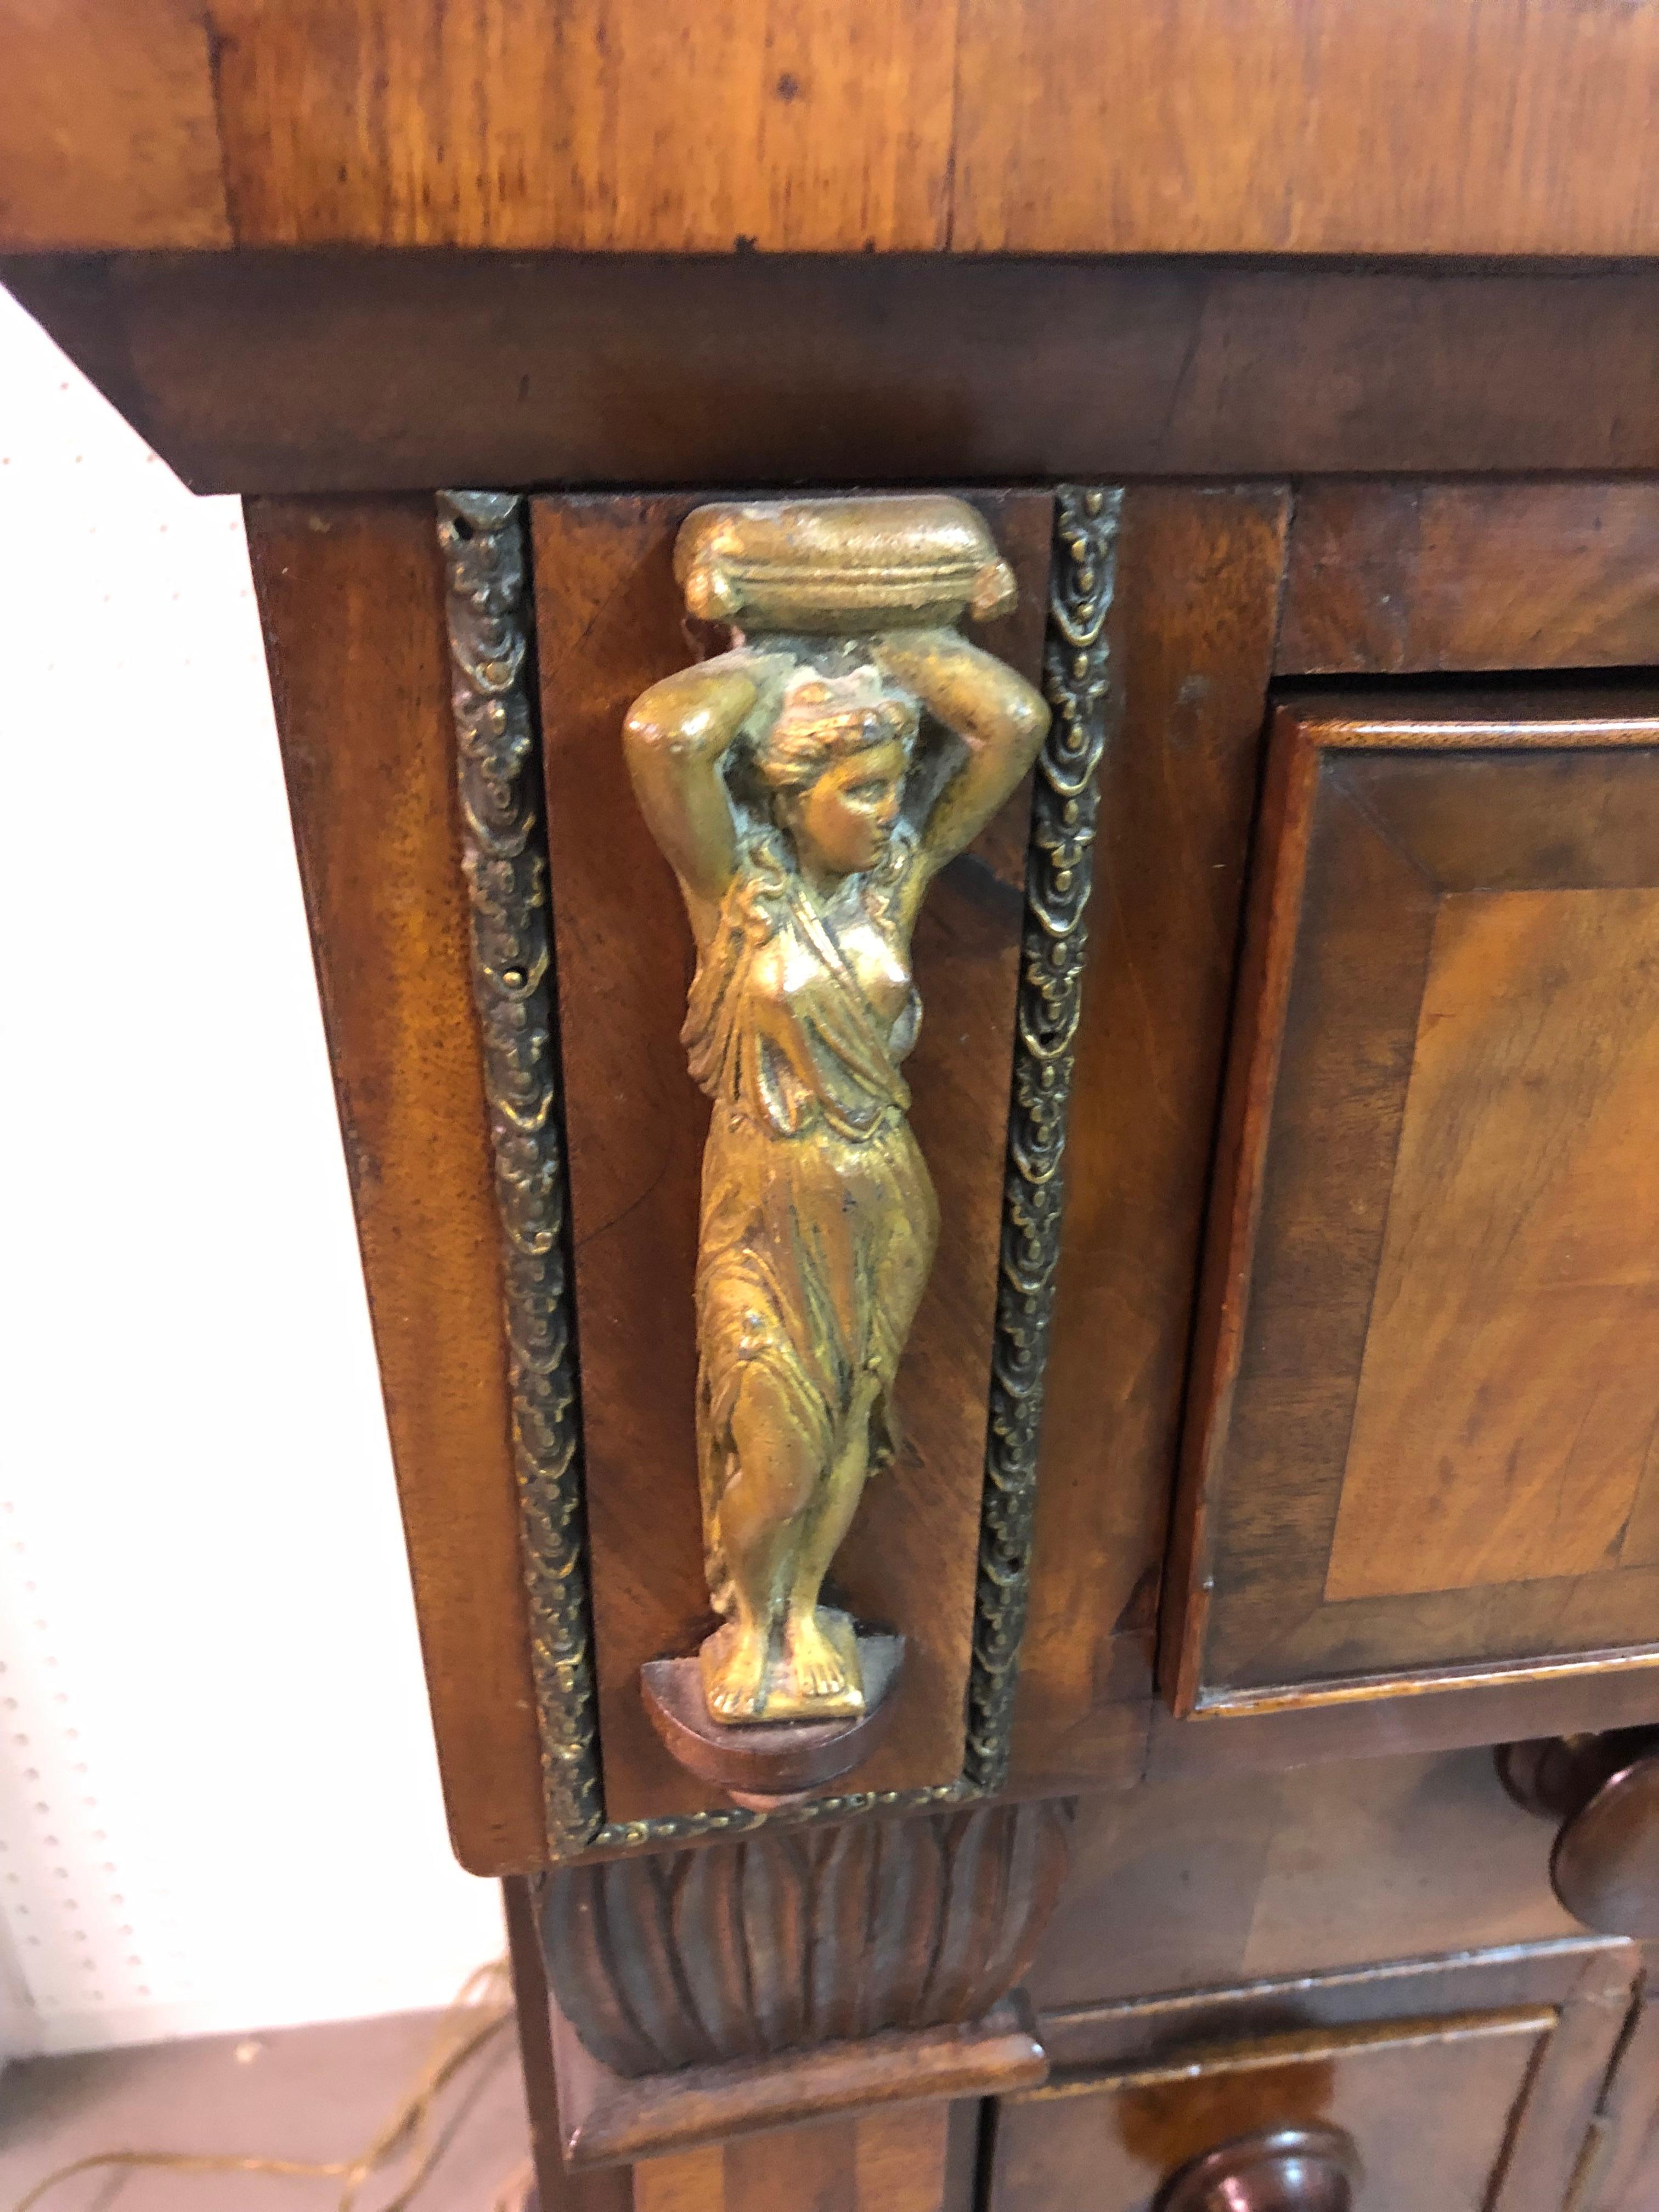 An old world mahogany Empire sideboard having molded top, cockbeaded drawer fronts, and gorgeous brass neoclassical figural mounts. There are two paneled doors with storage inside, two liquor bottle storage compartments, two drawers with one lined